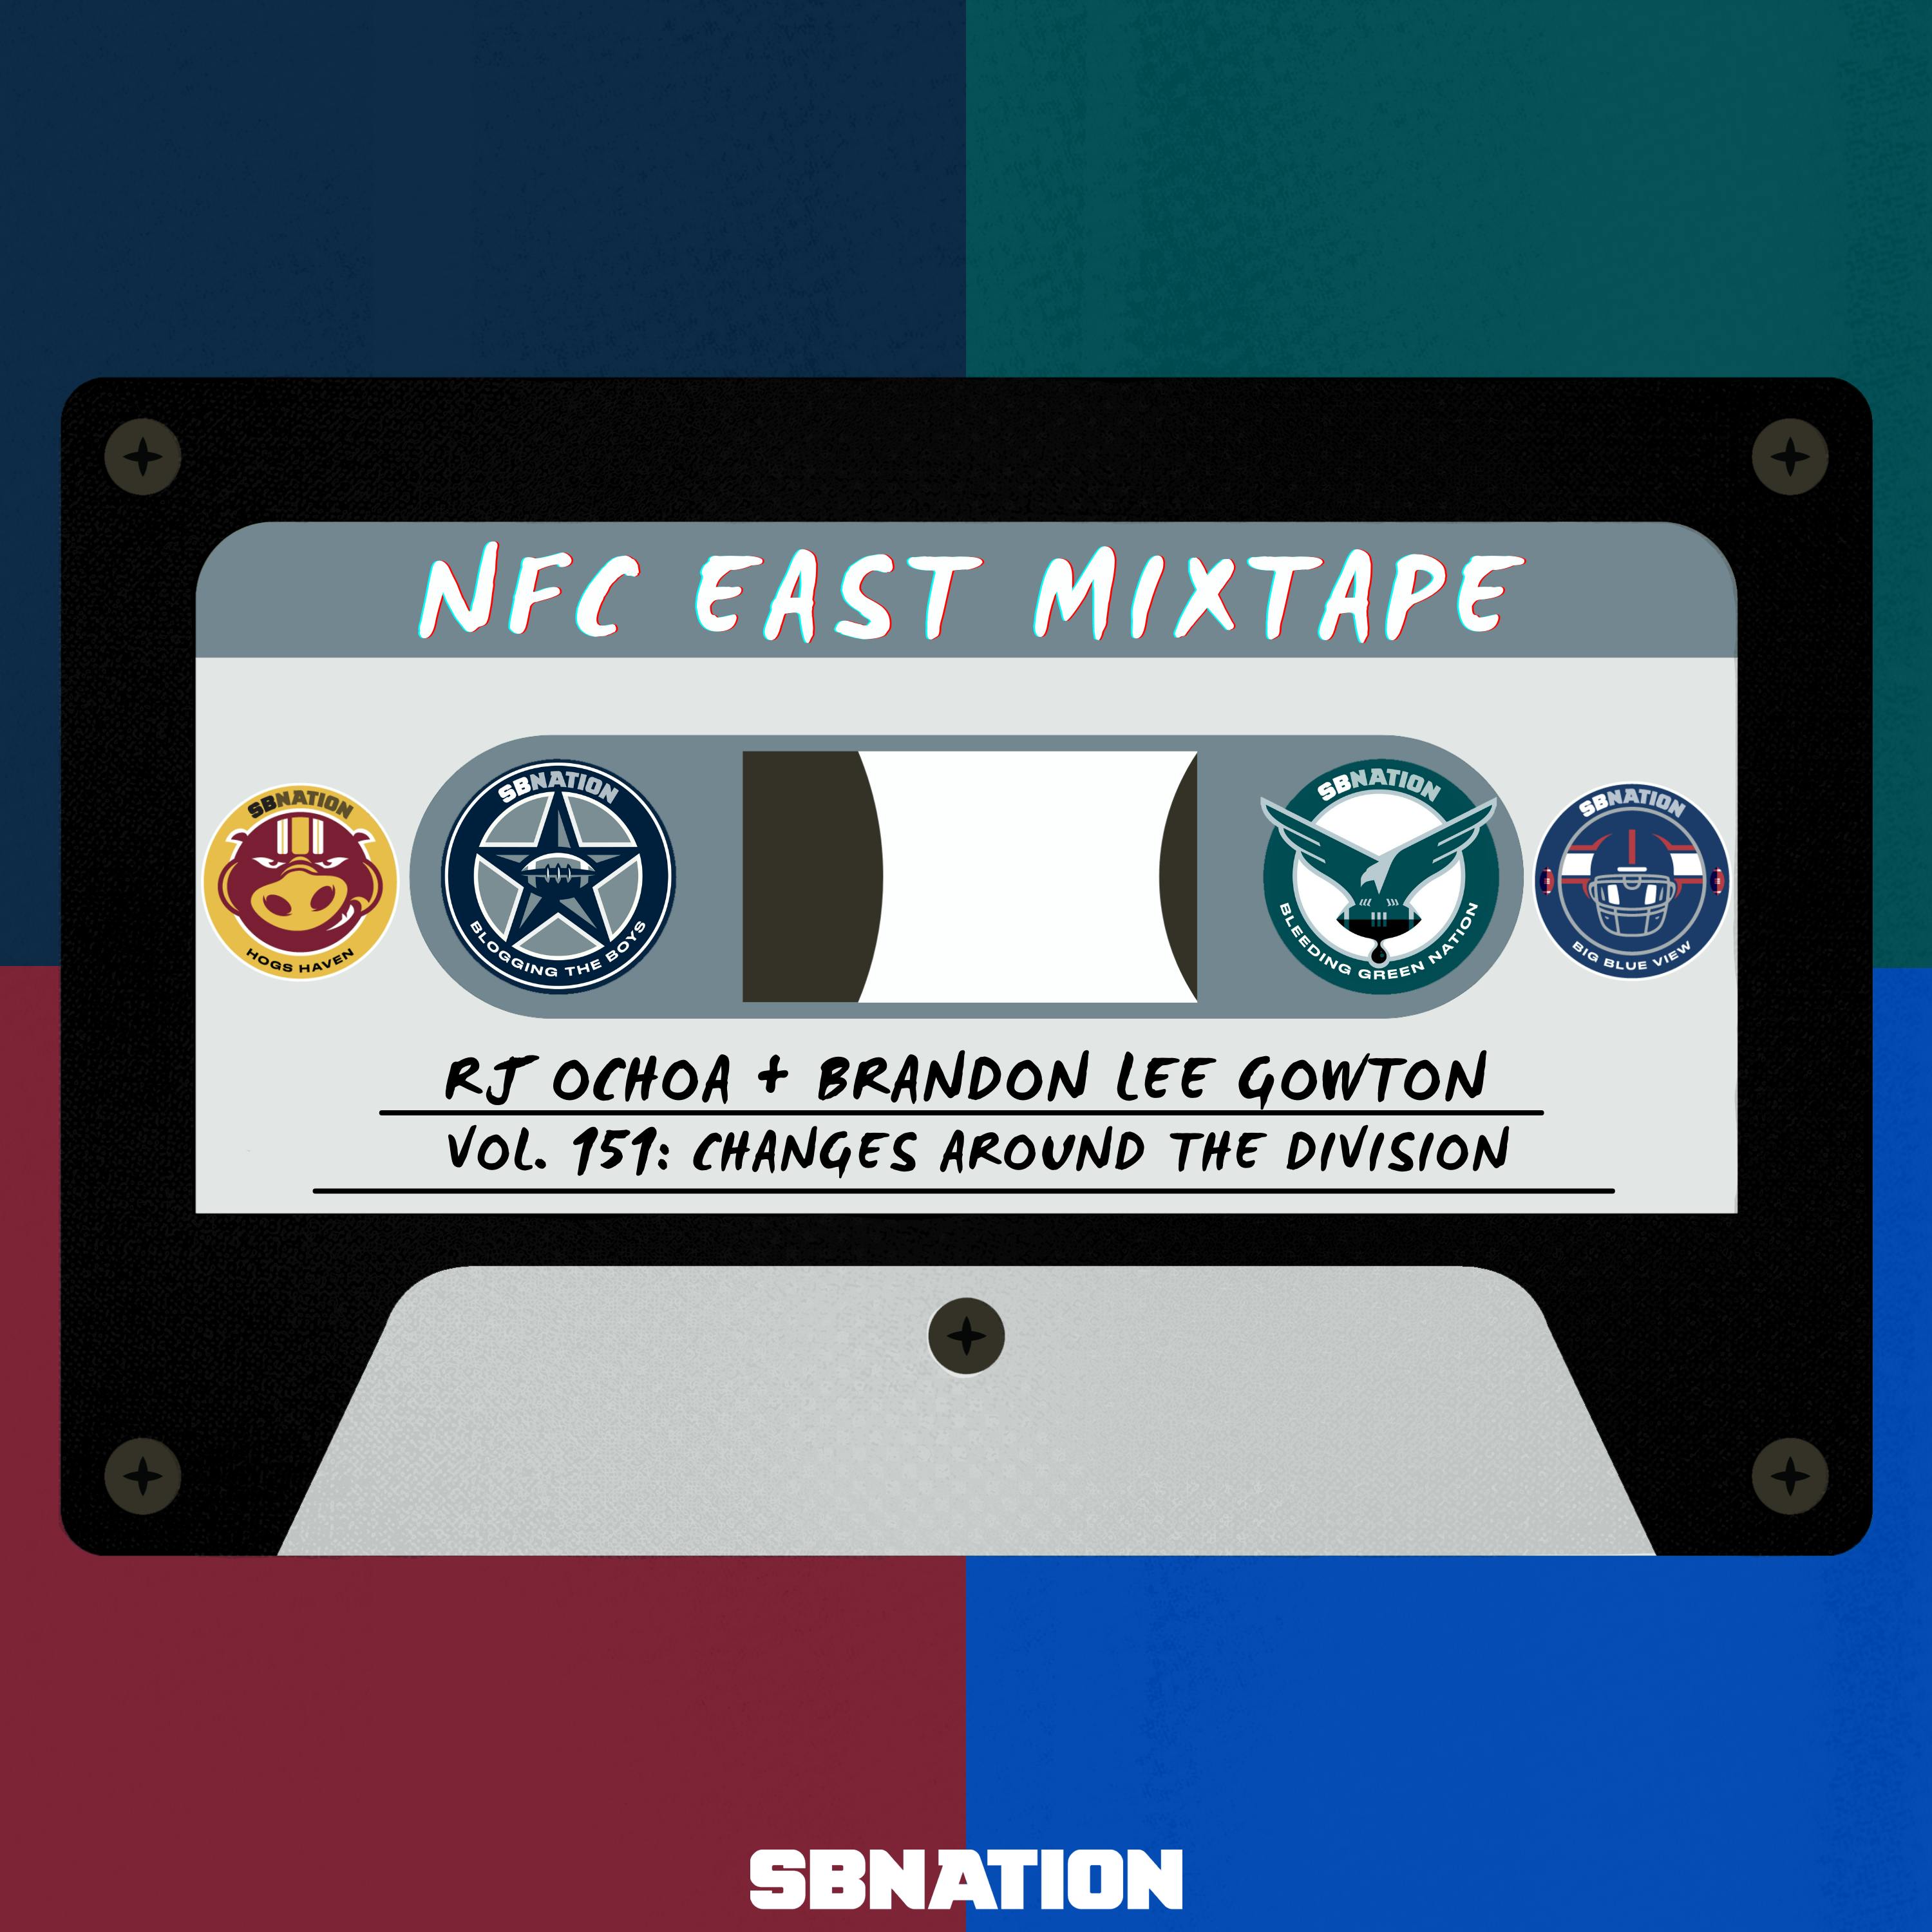 NFC East Mixtape Vol.151: Changes around the division